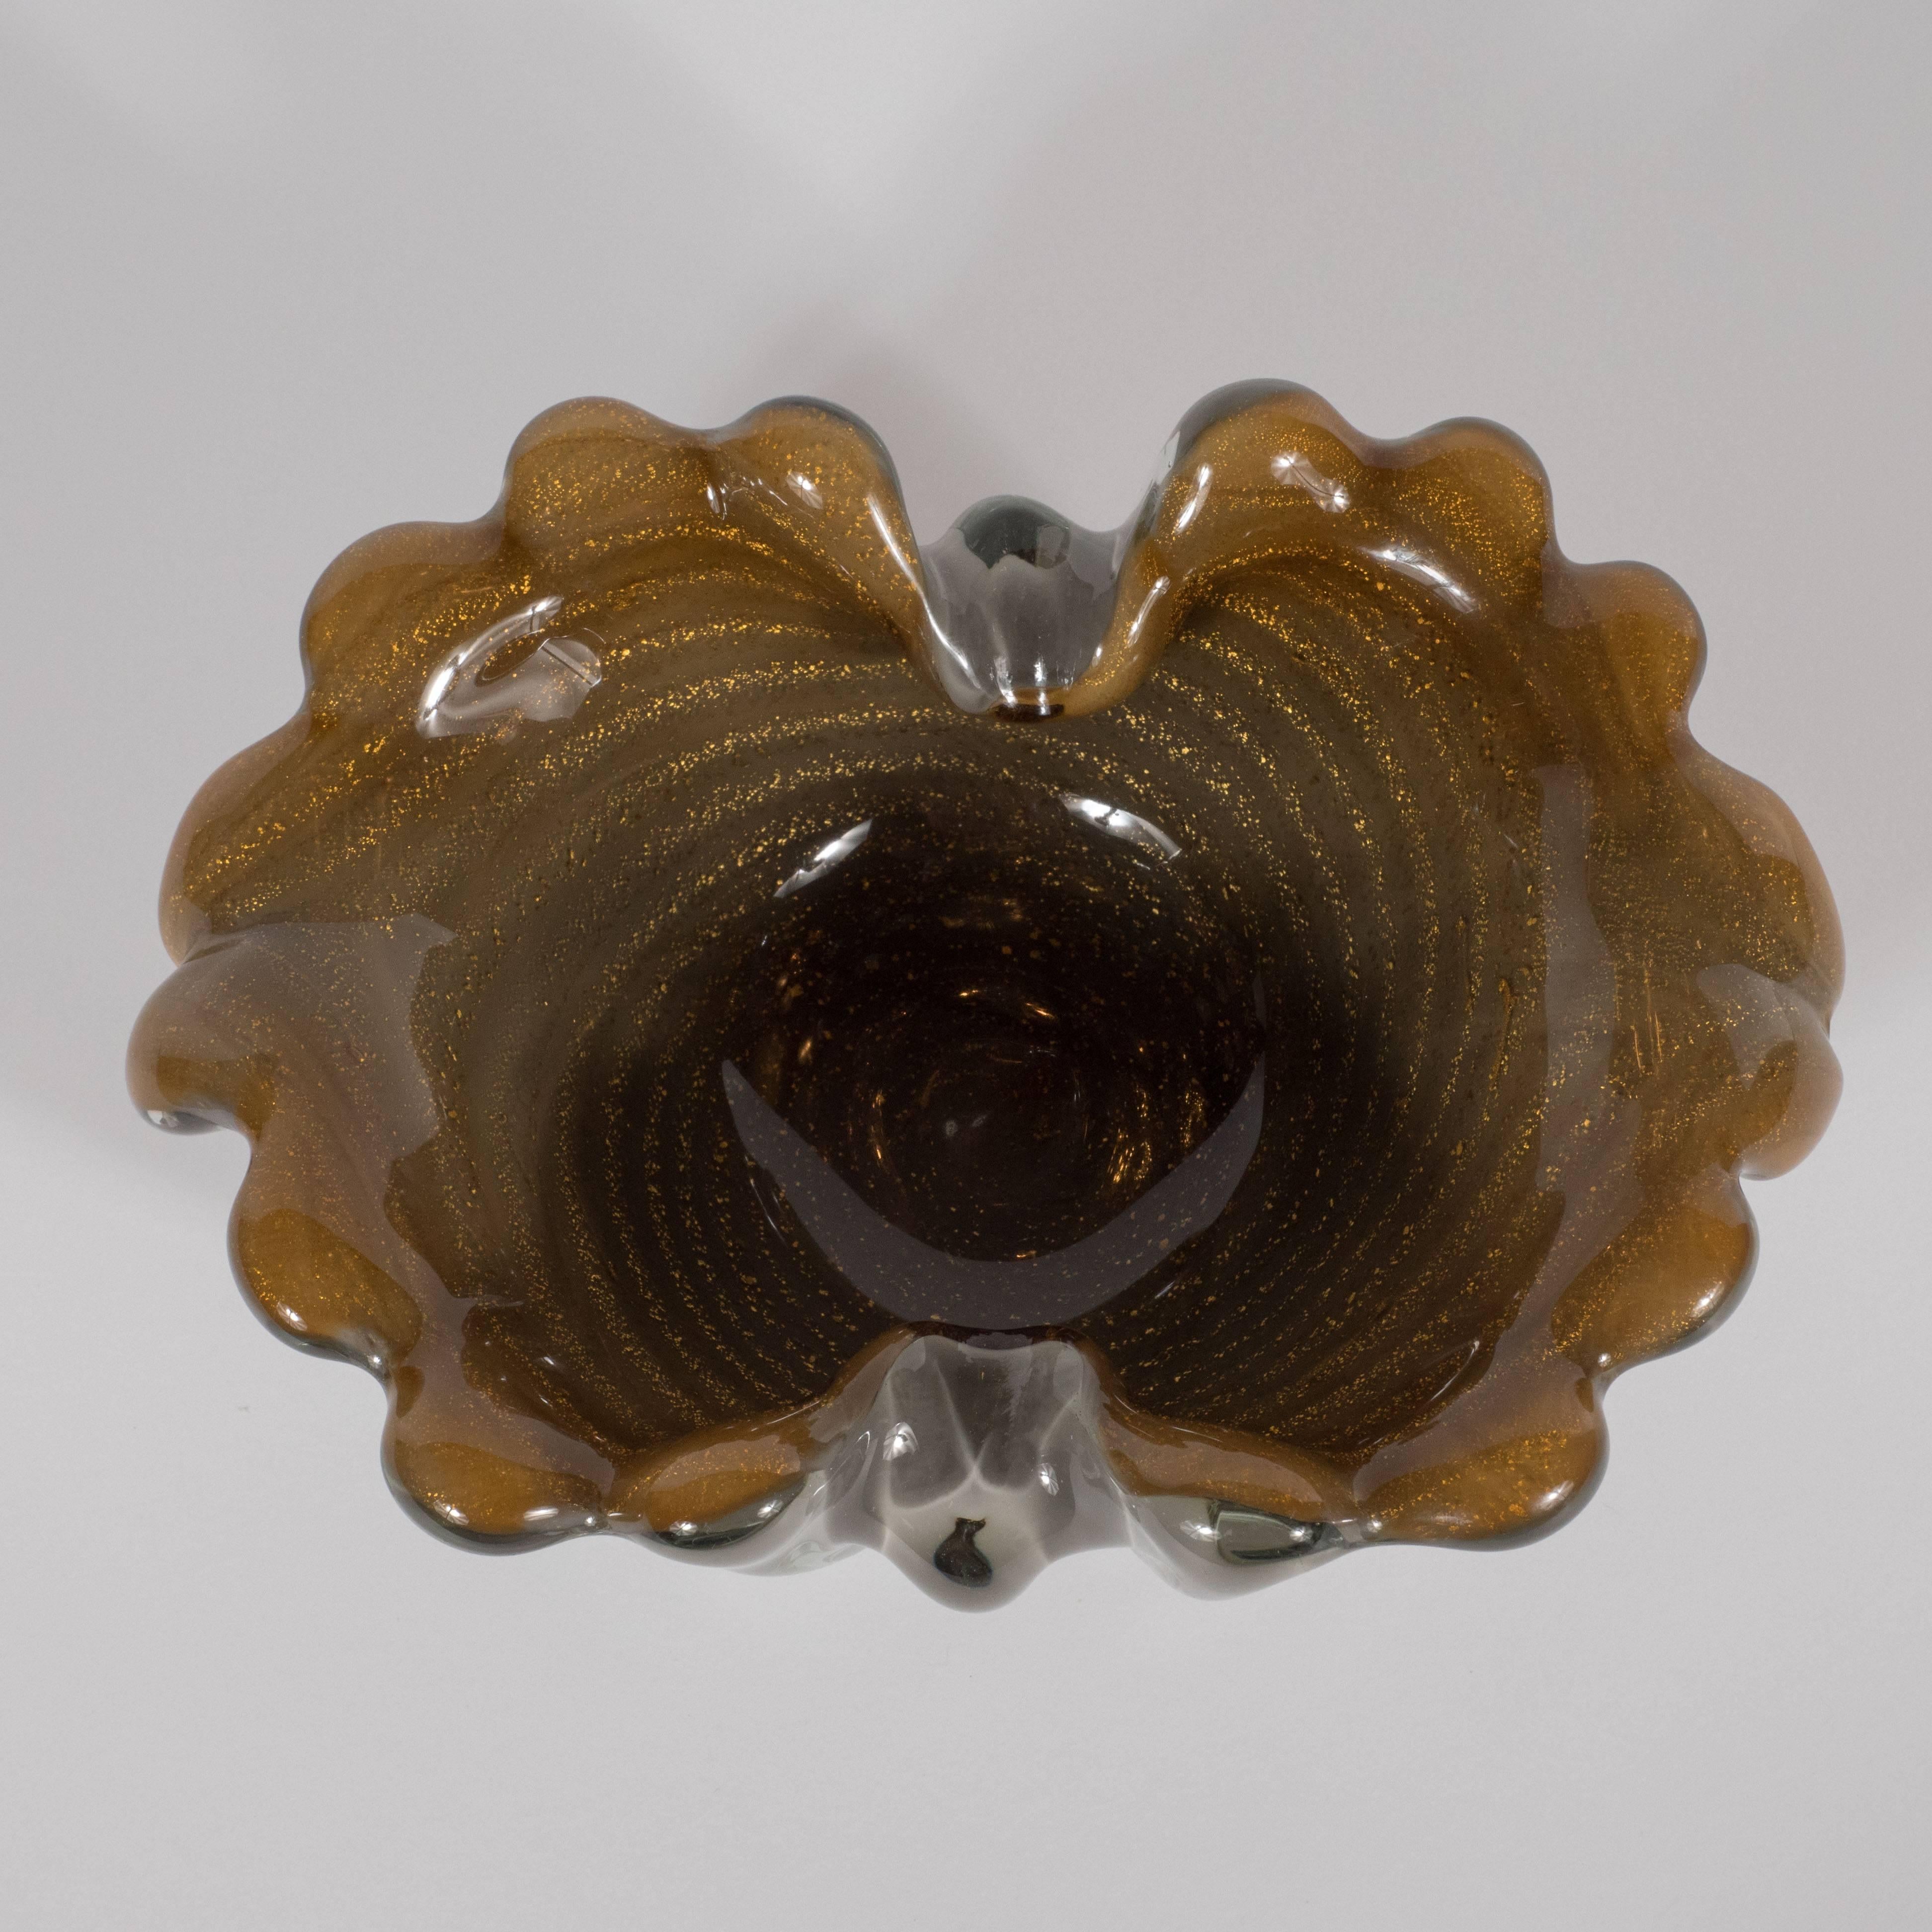 Gold Mid-Century Modern Handblown Murano Bowl in Hues of Antique Bronze & Pewter